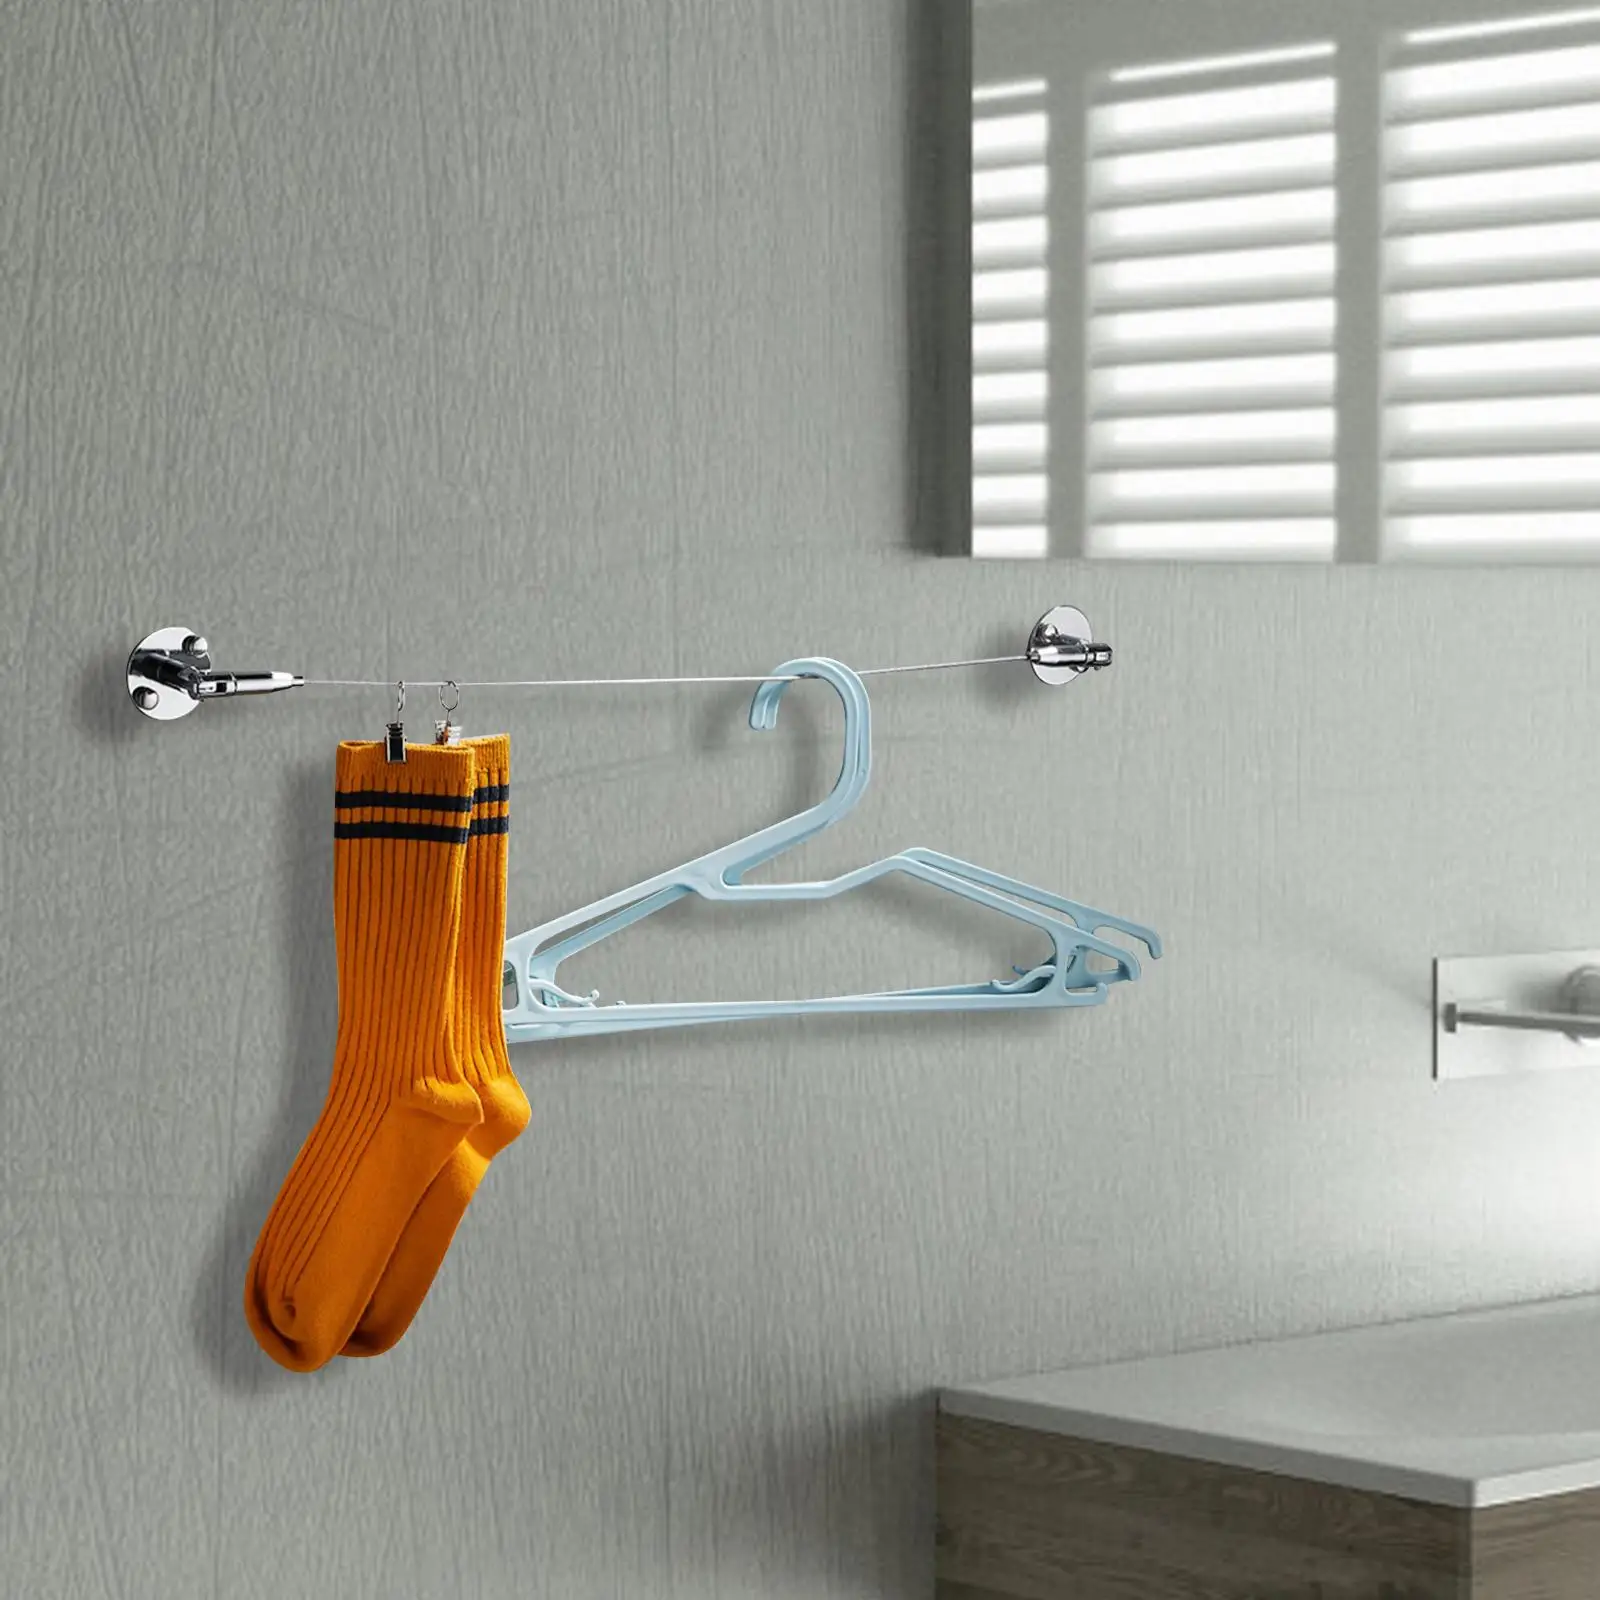 Multifunction Clothesline Space Saving Wall Mounted for Household Bathroom